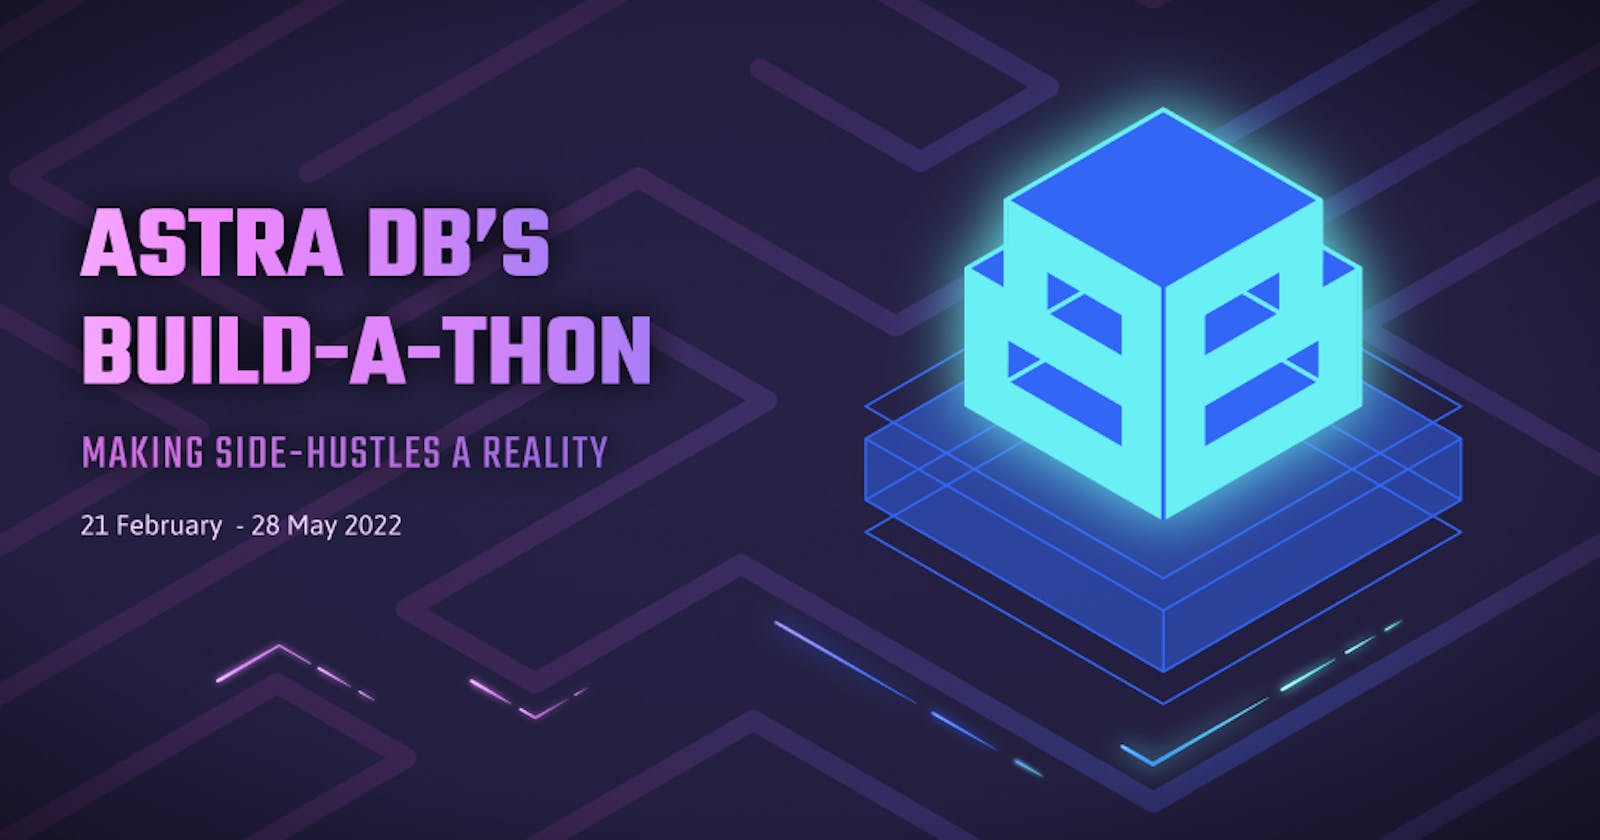 All about the AstraDB Build-A-Thon